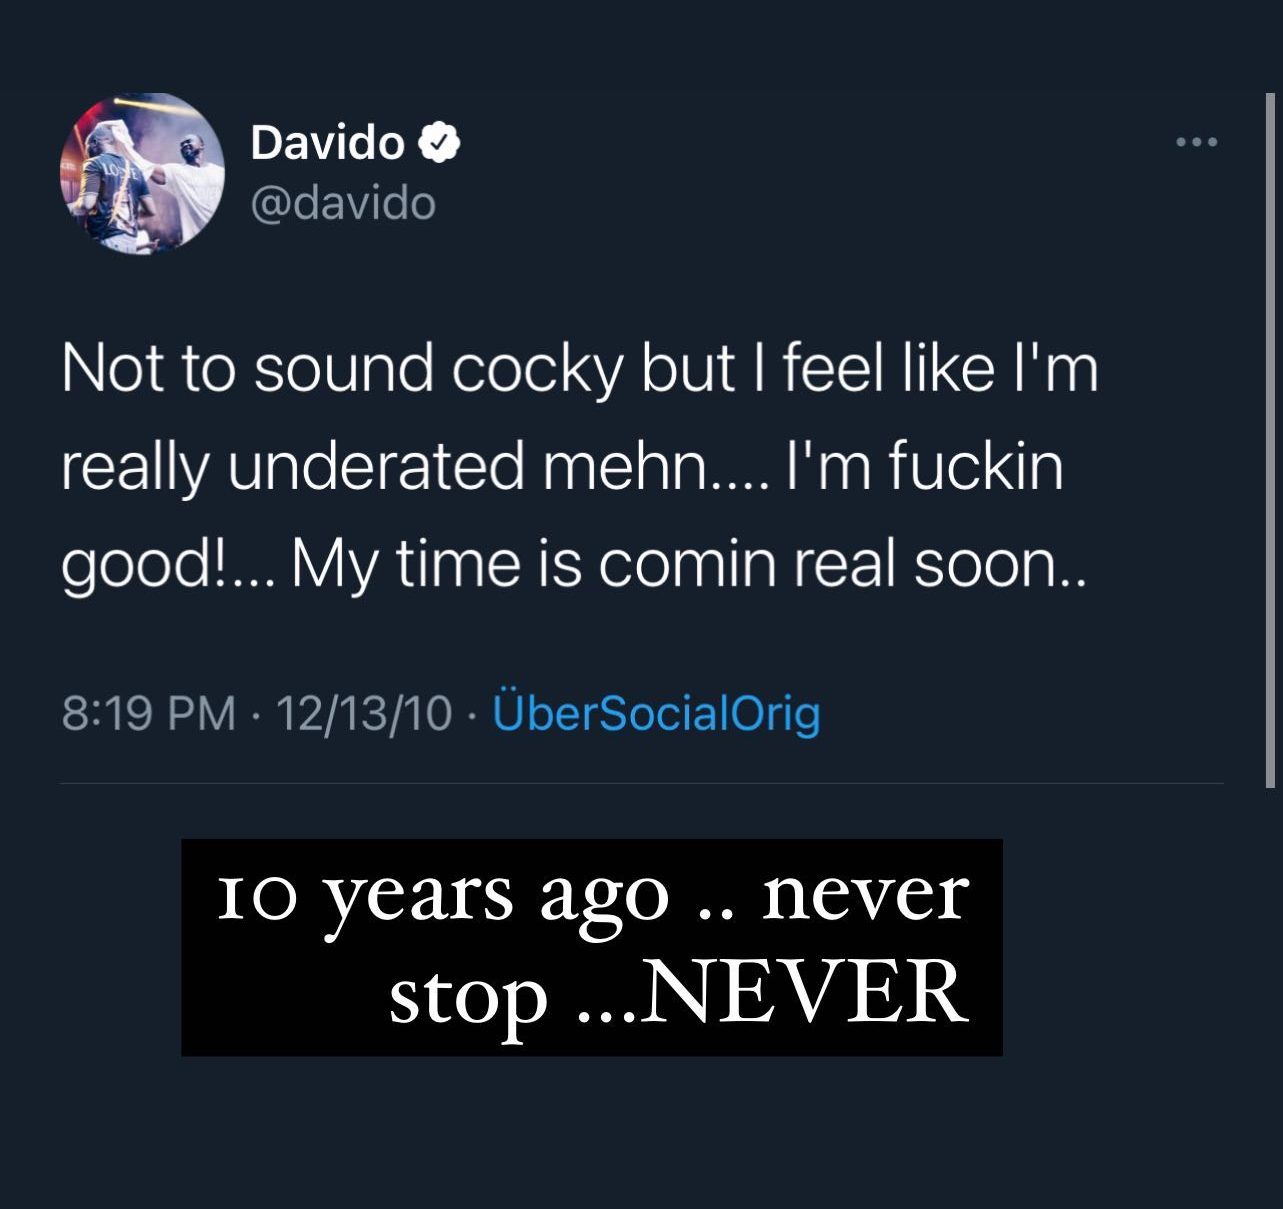 "Never give up" - Davido says as he shares tweet from 2010 on how underrated he is